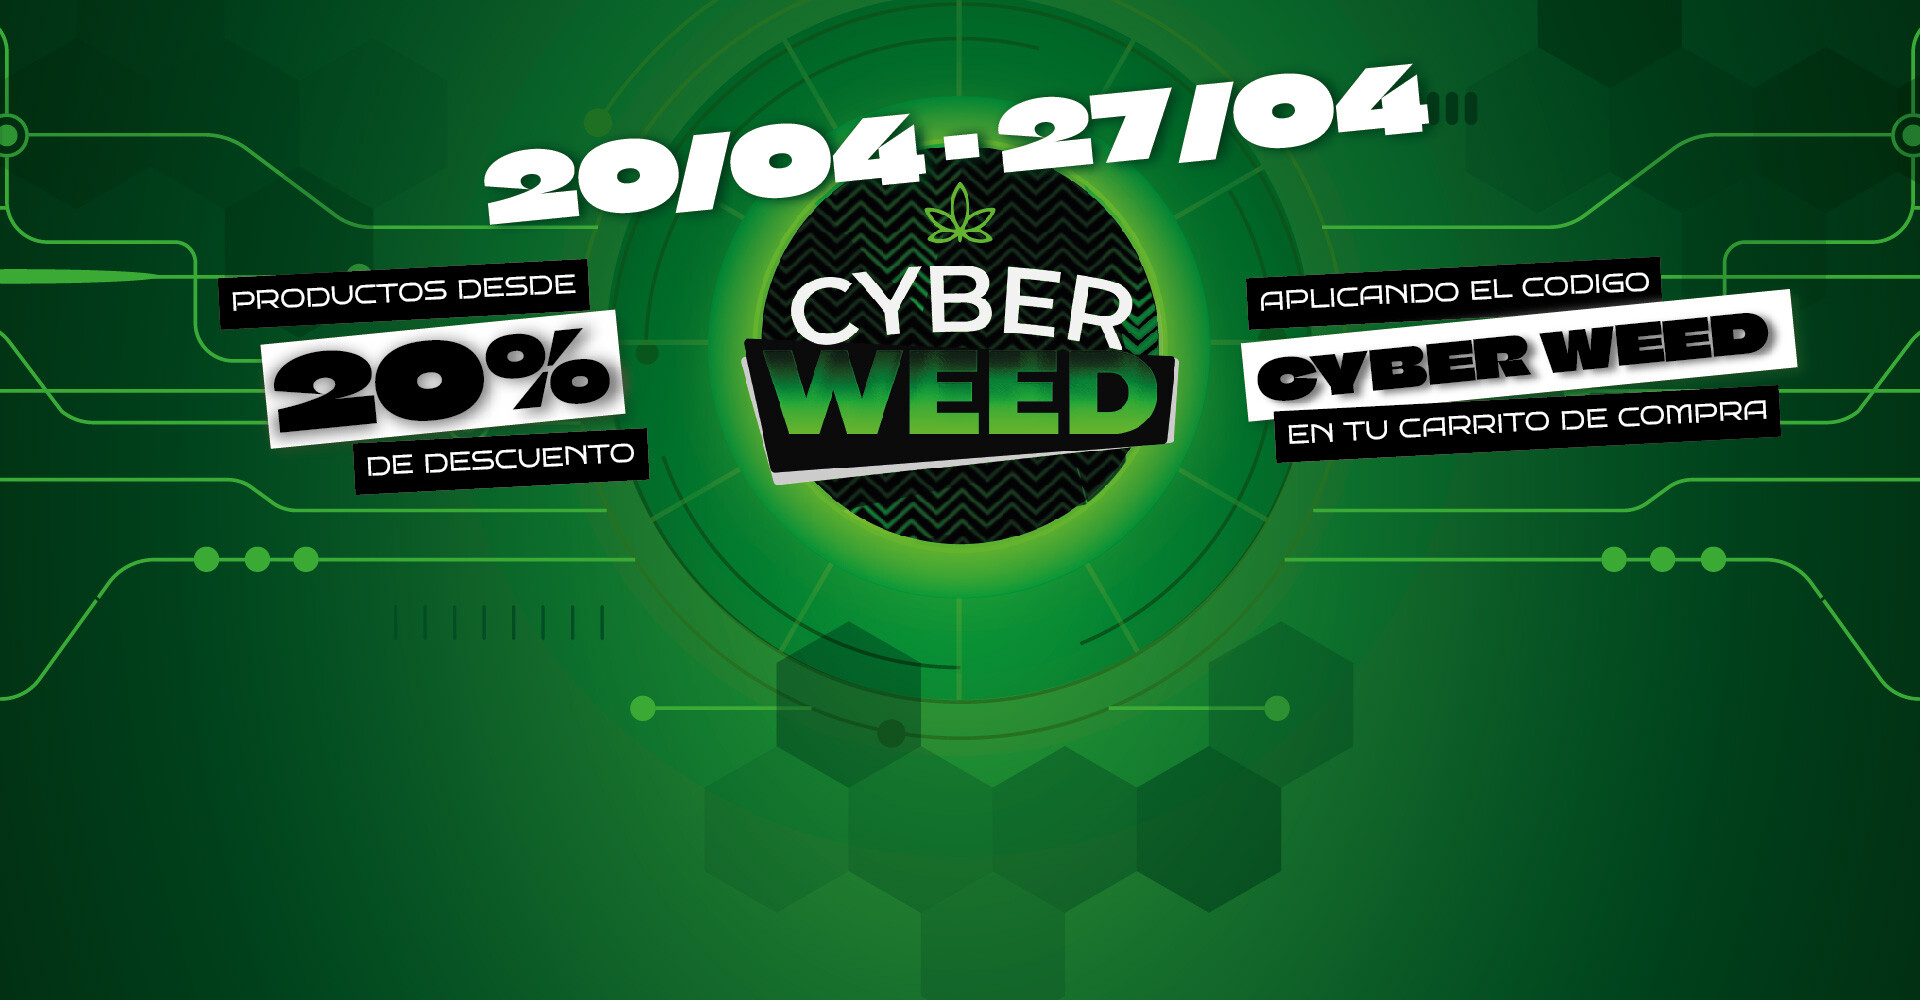 CYBER WEED 24